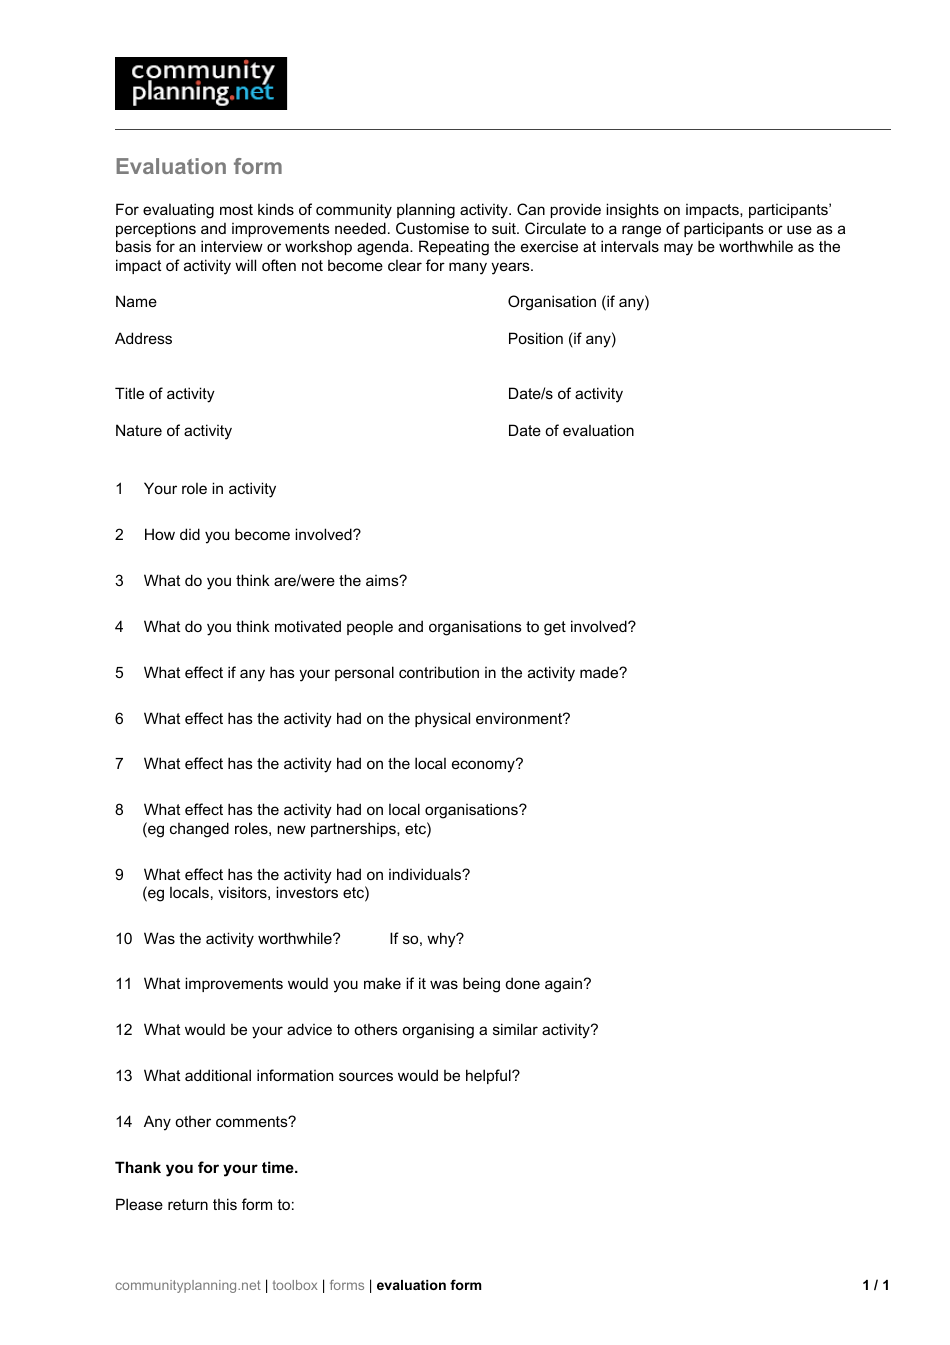 Community Planning Activity Evaluation Form - Community Planning.net, Page 1